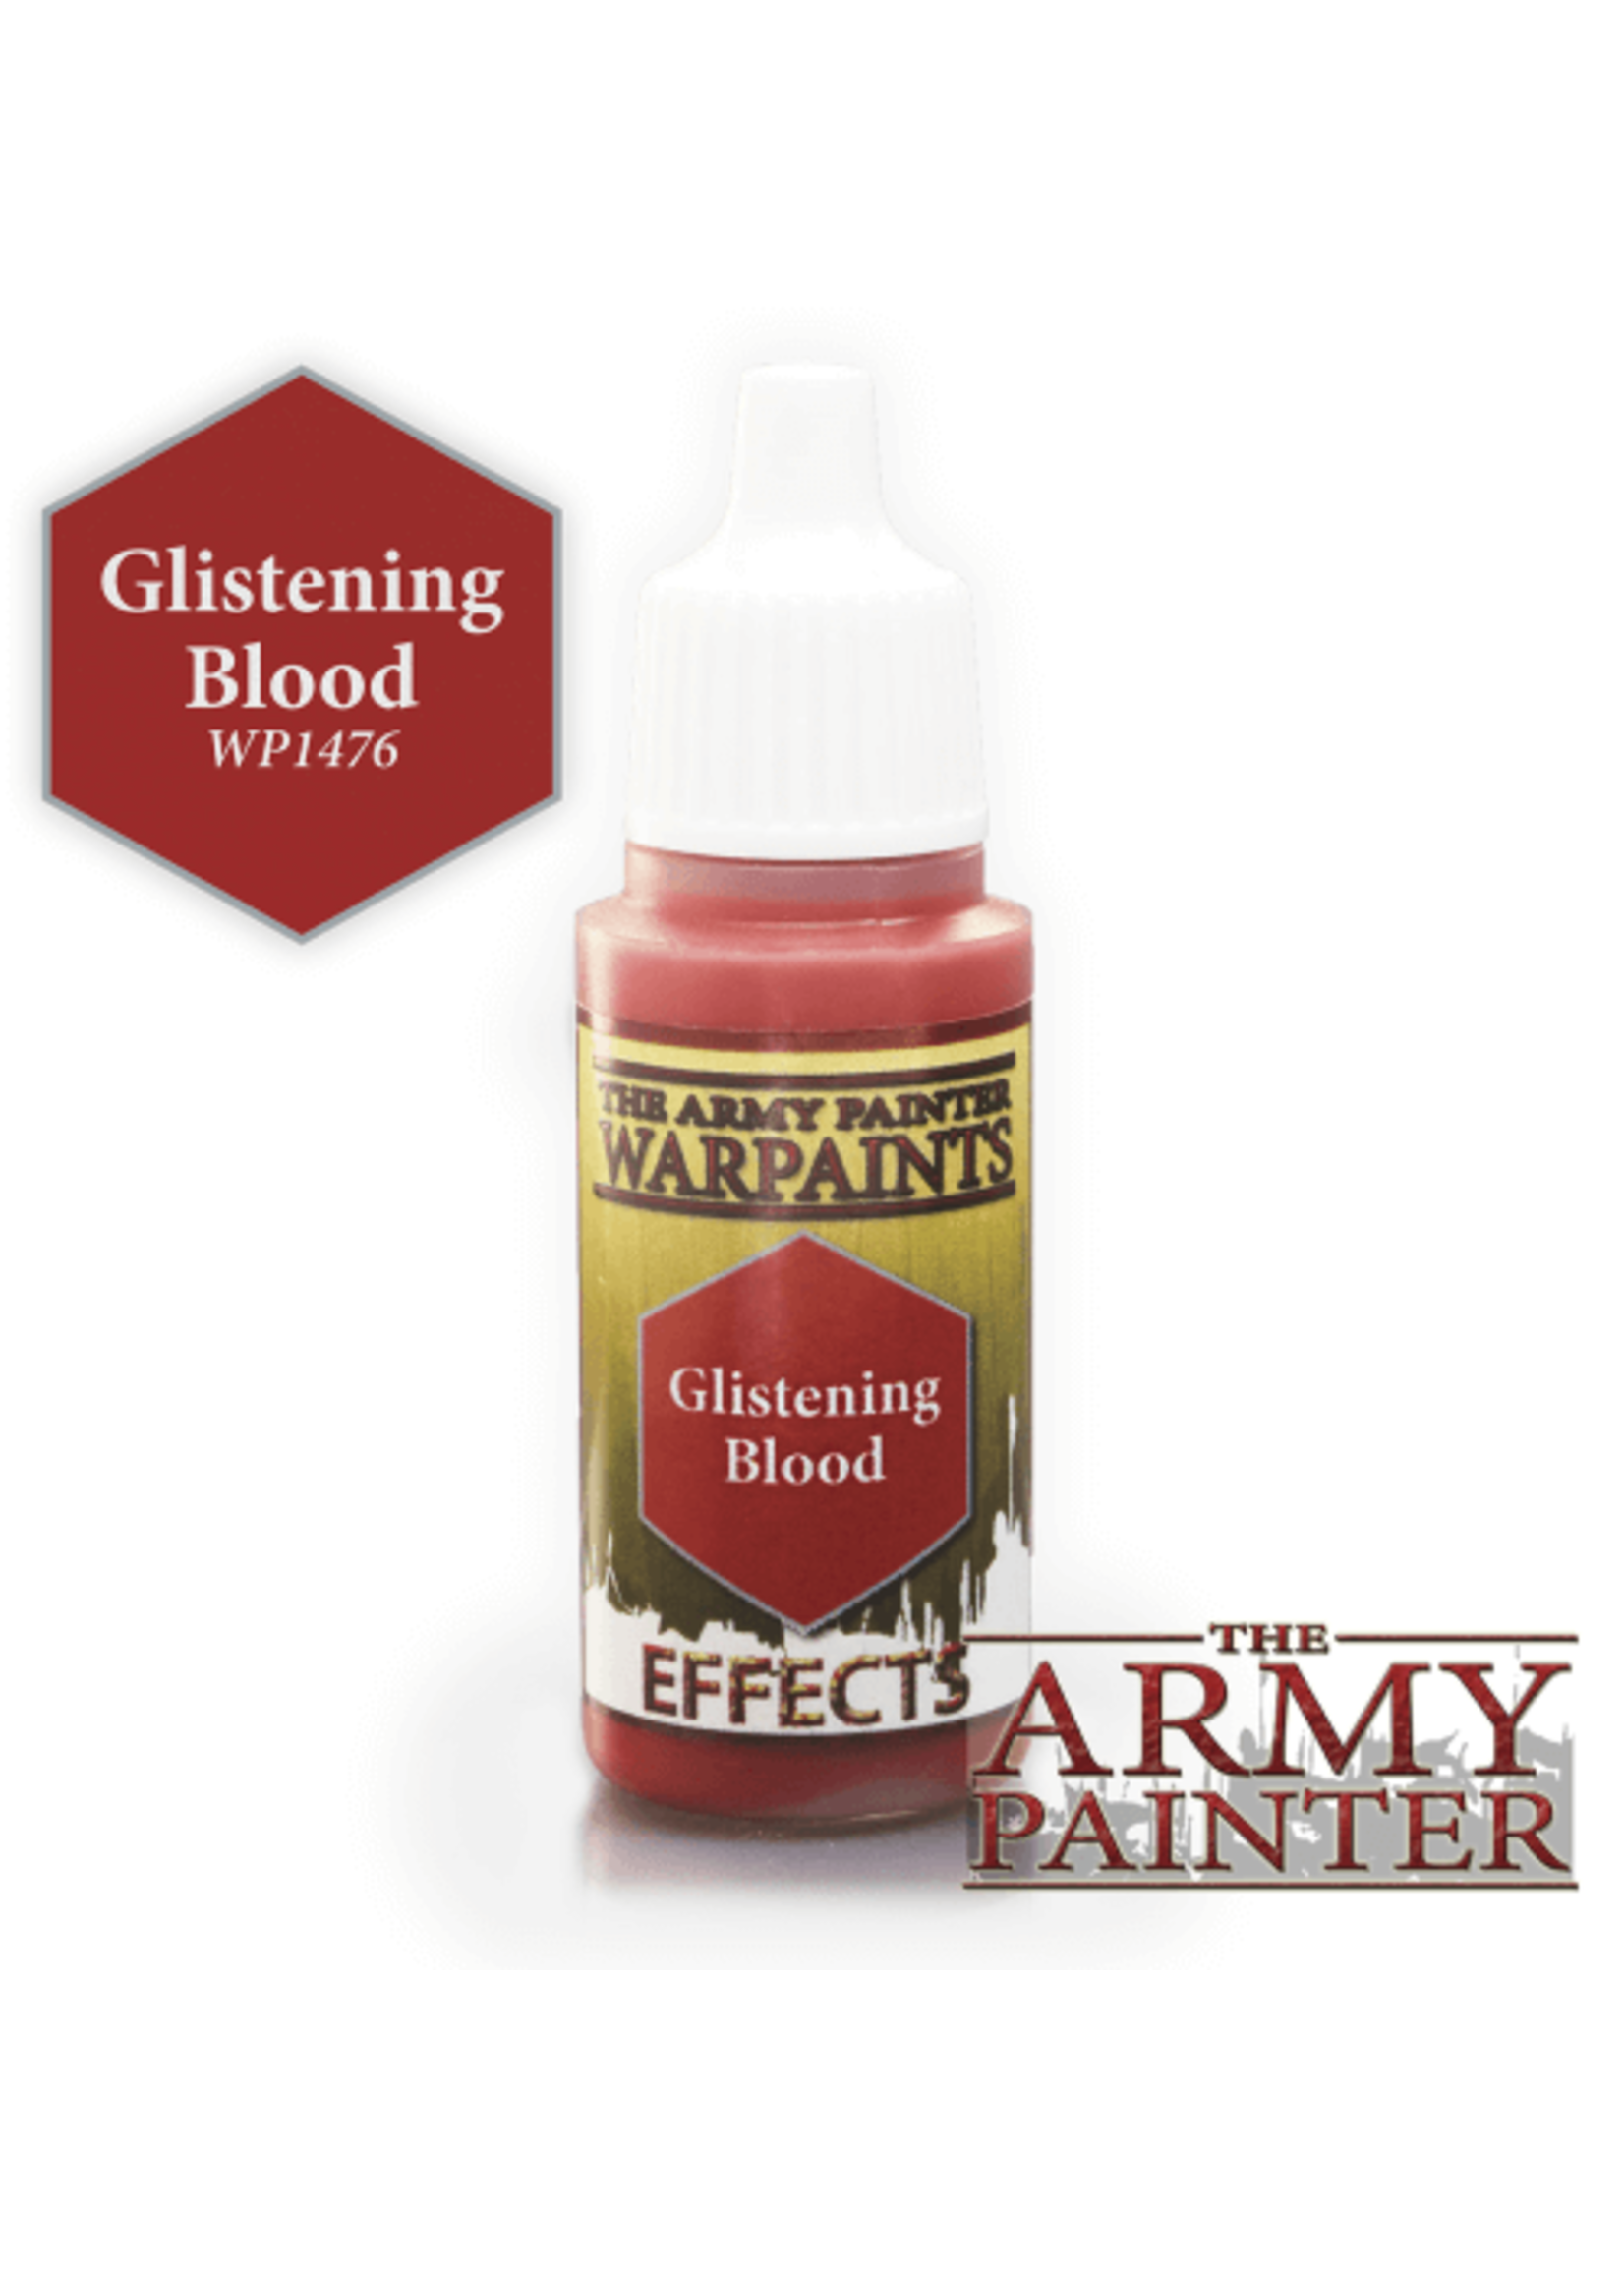 The Army Painter Effects Warpaints Glistening Blood